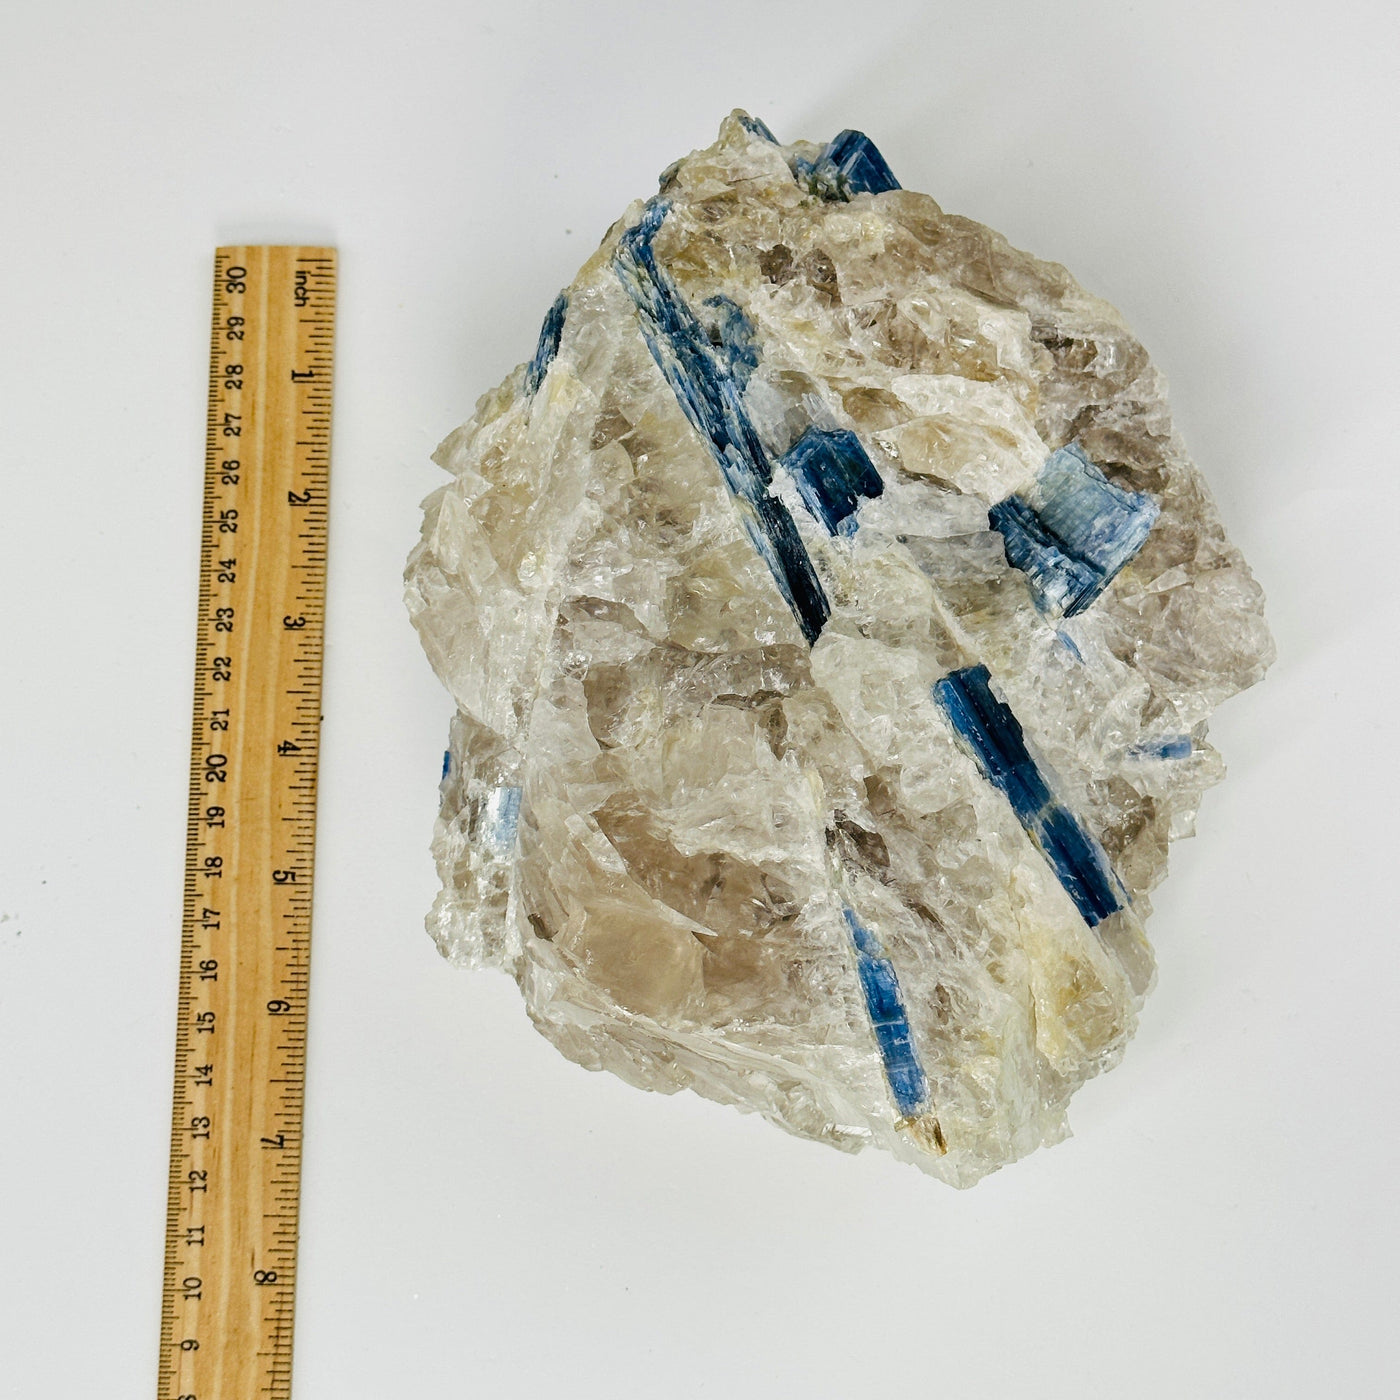 kyanite on matrix next to a ruler for size reference